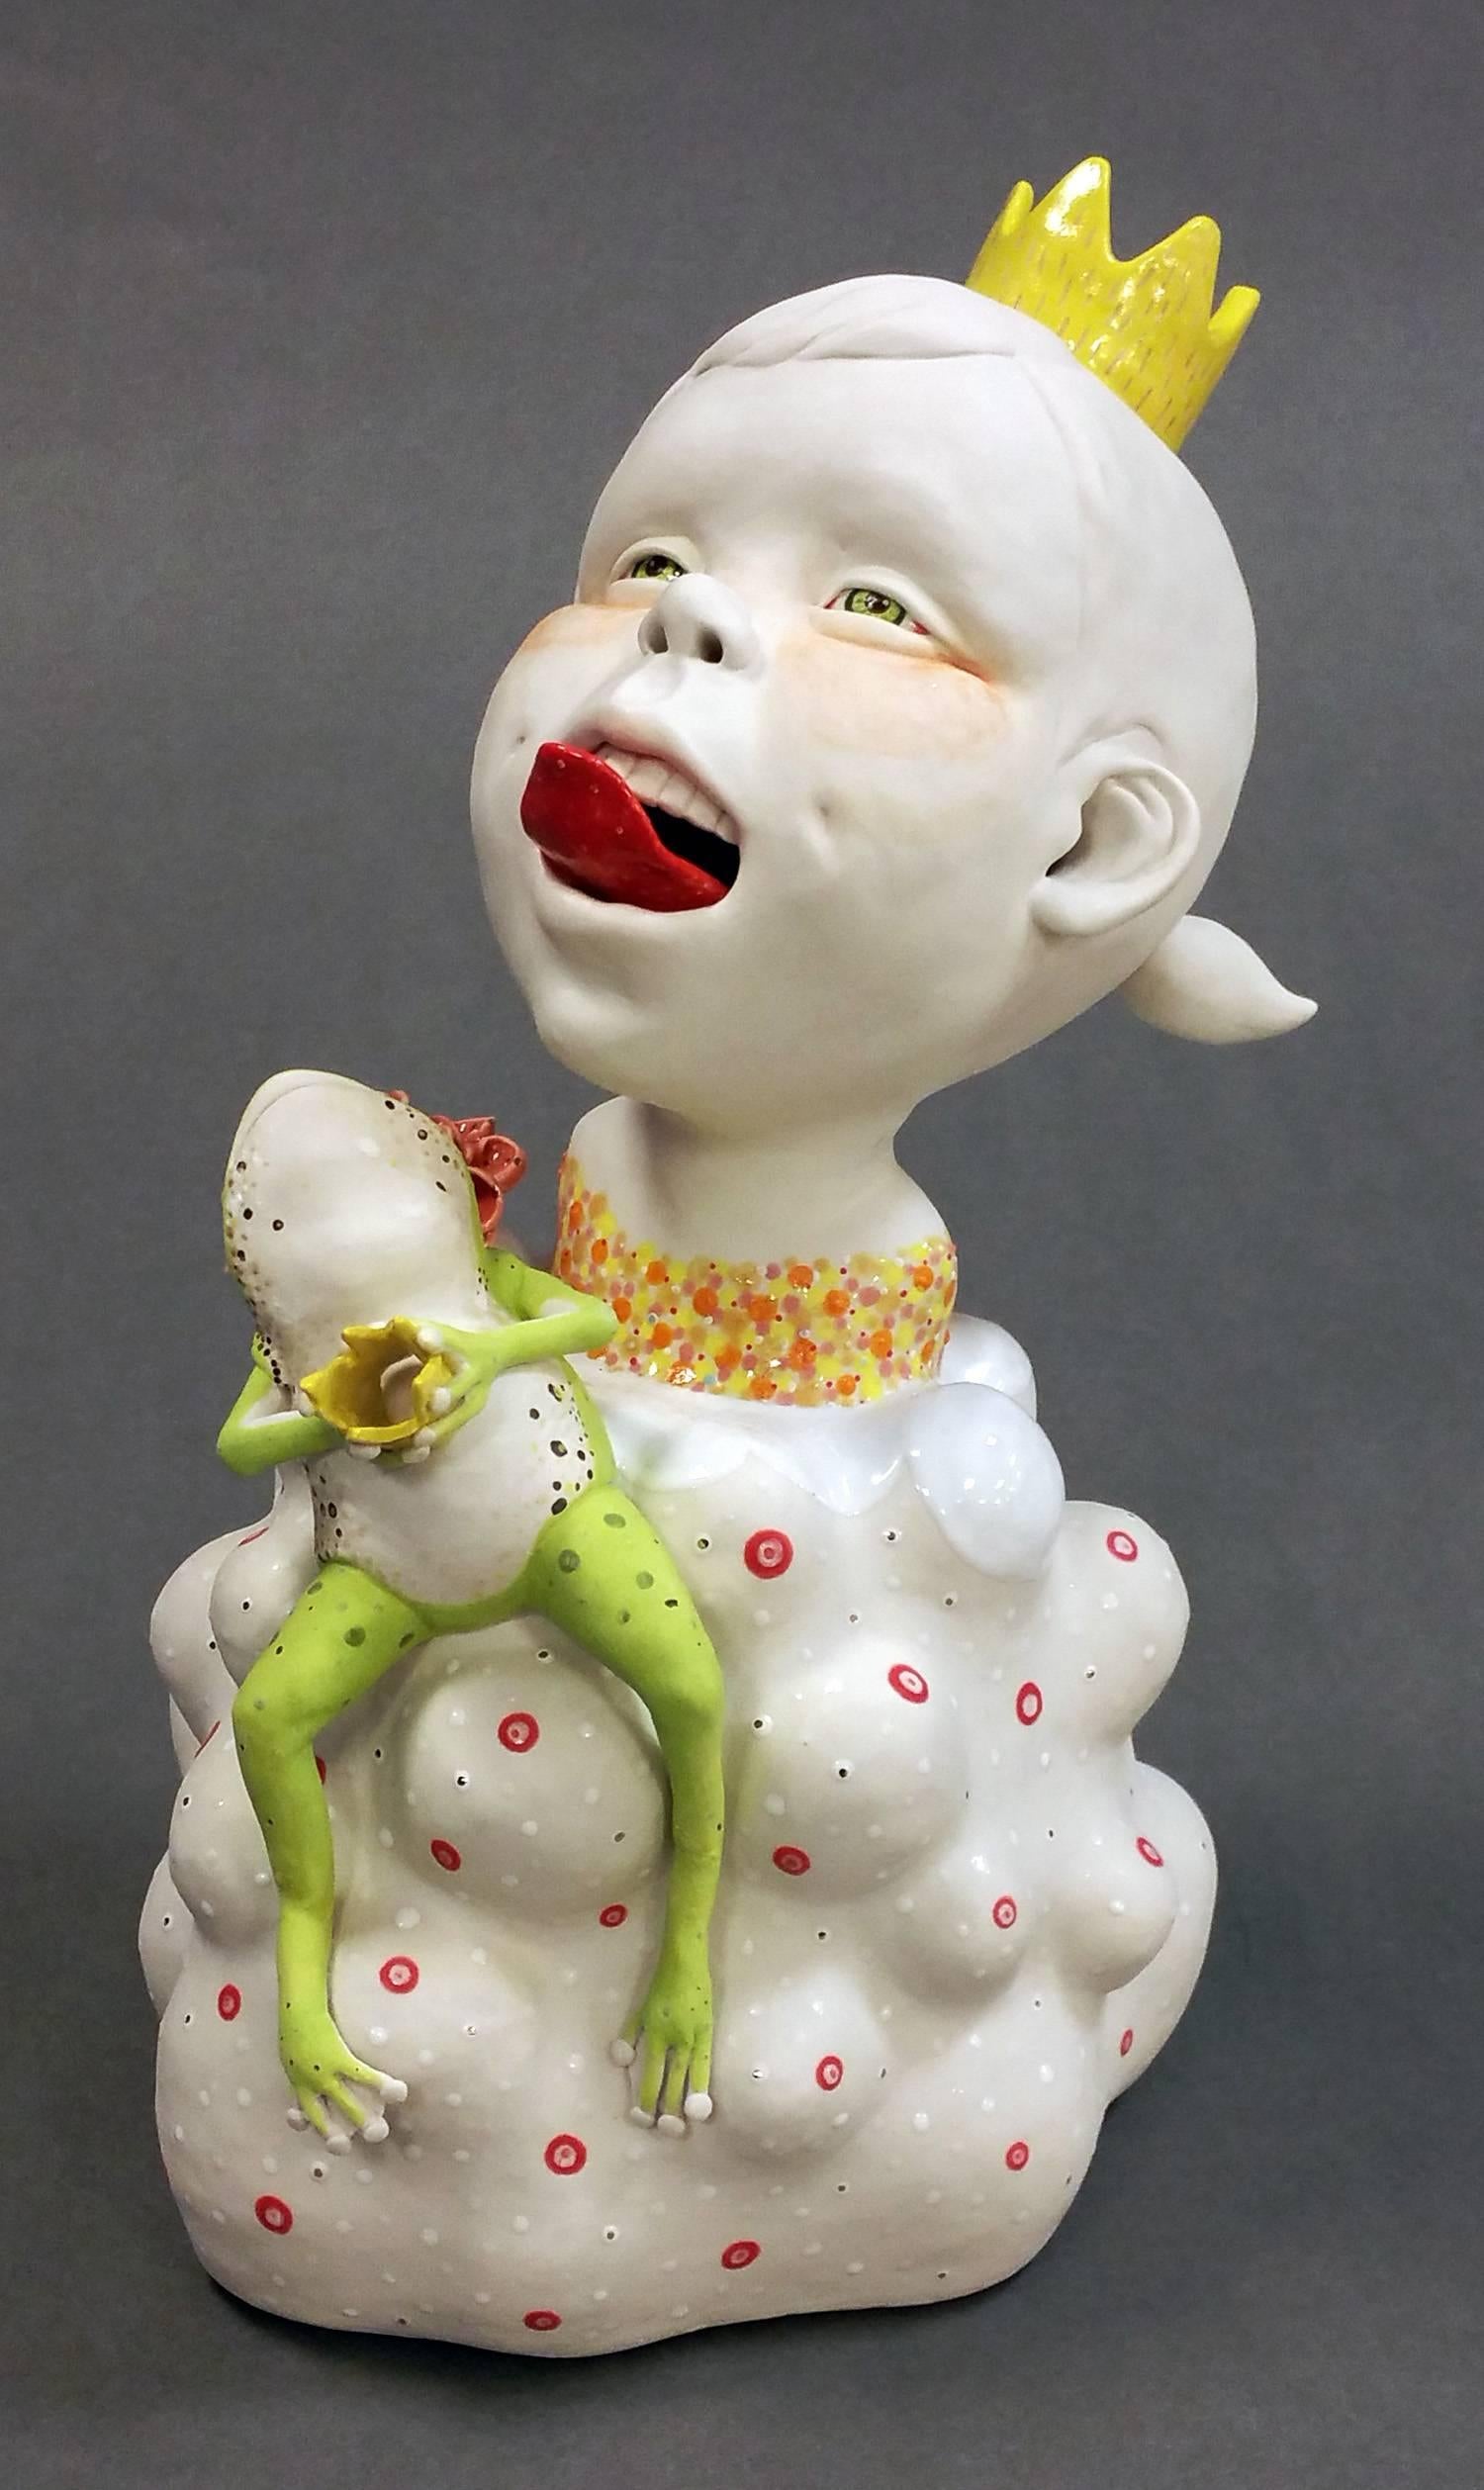 Kyungmin Park Figurative Sculpture - You're not my prince charming